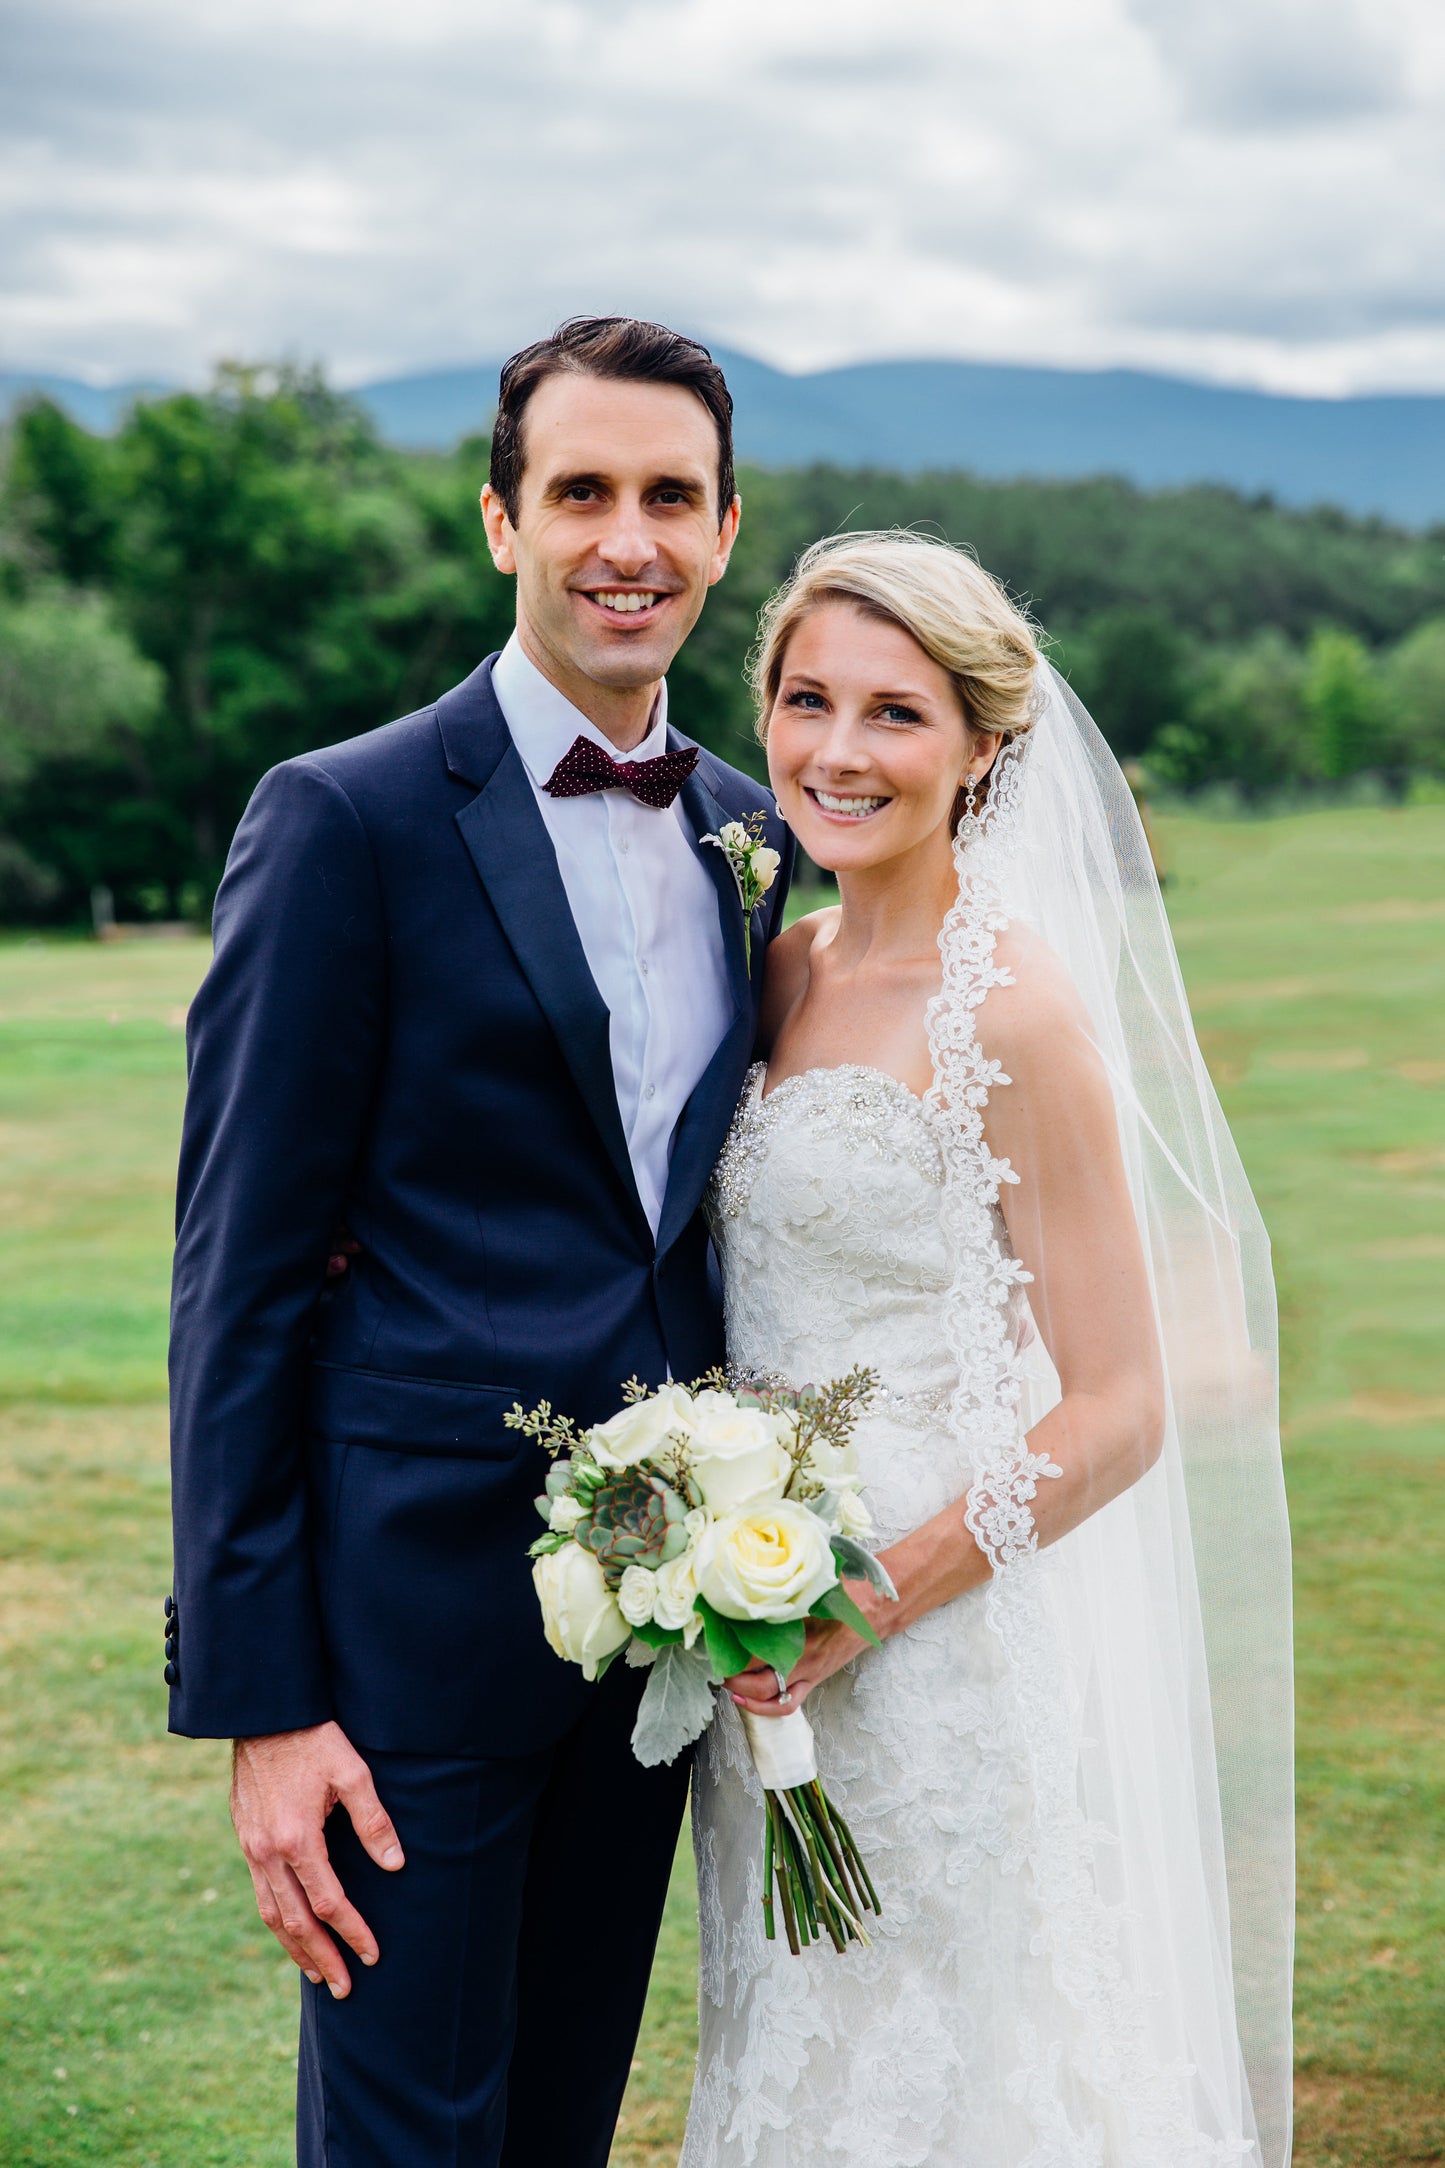 Bride and Groom in Rustic Outdoor Wedding, Navy Blue Suit and Lace Wedding Veil with Updo